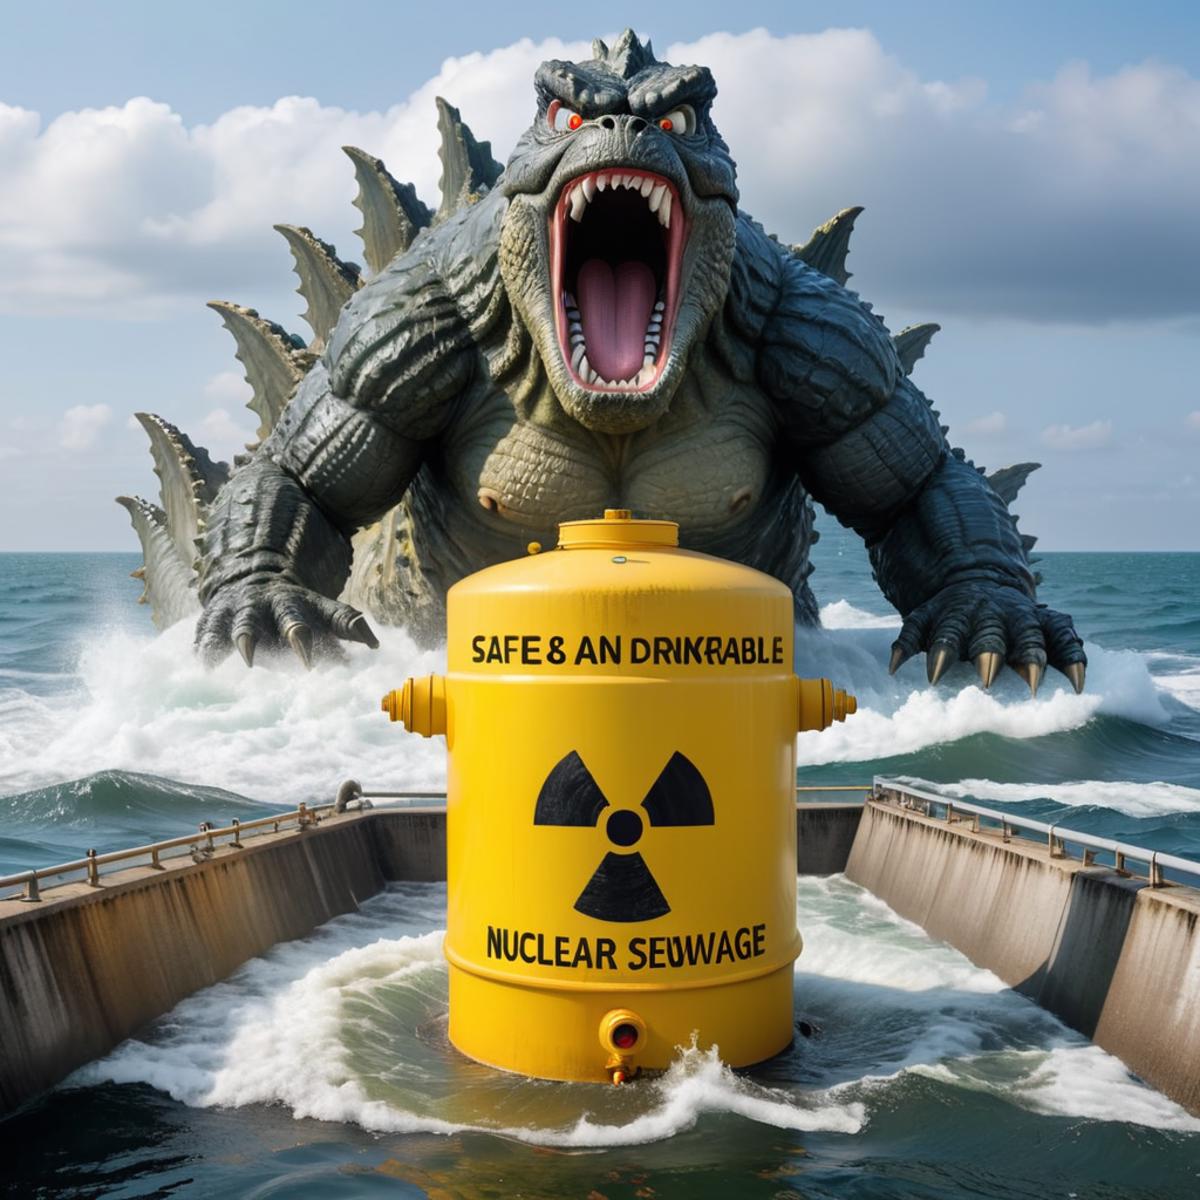 A giant Godzilla head with an open mouth and yellow container with a nuclear sign on it.